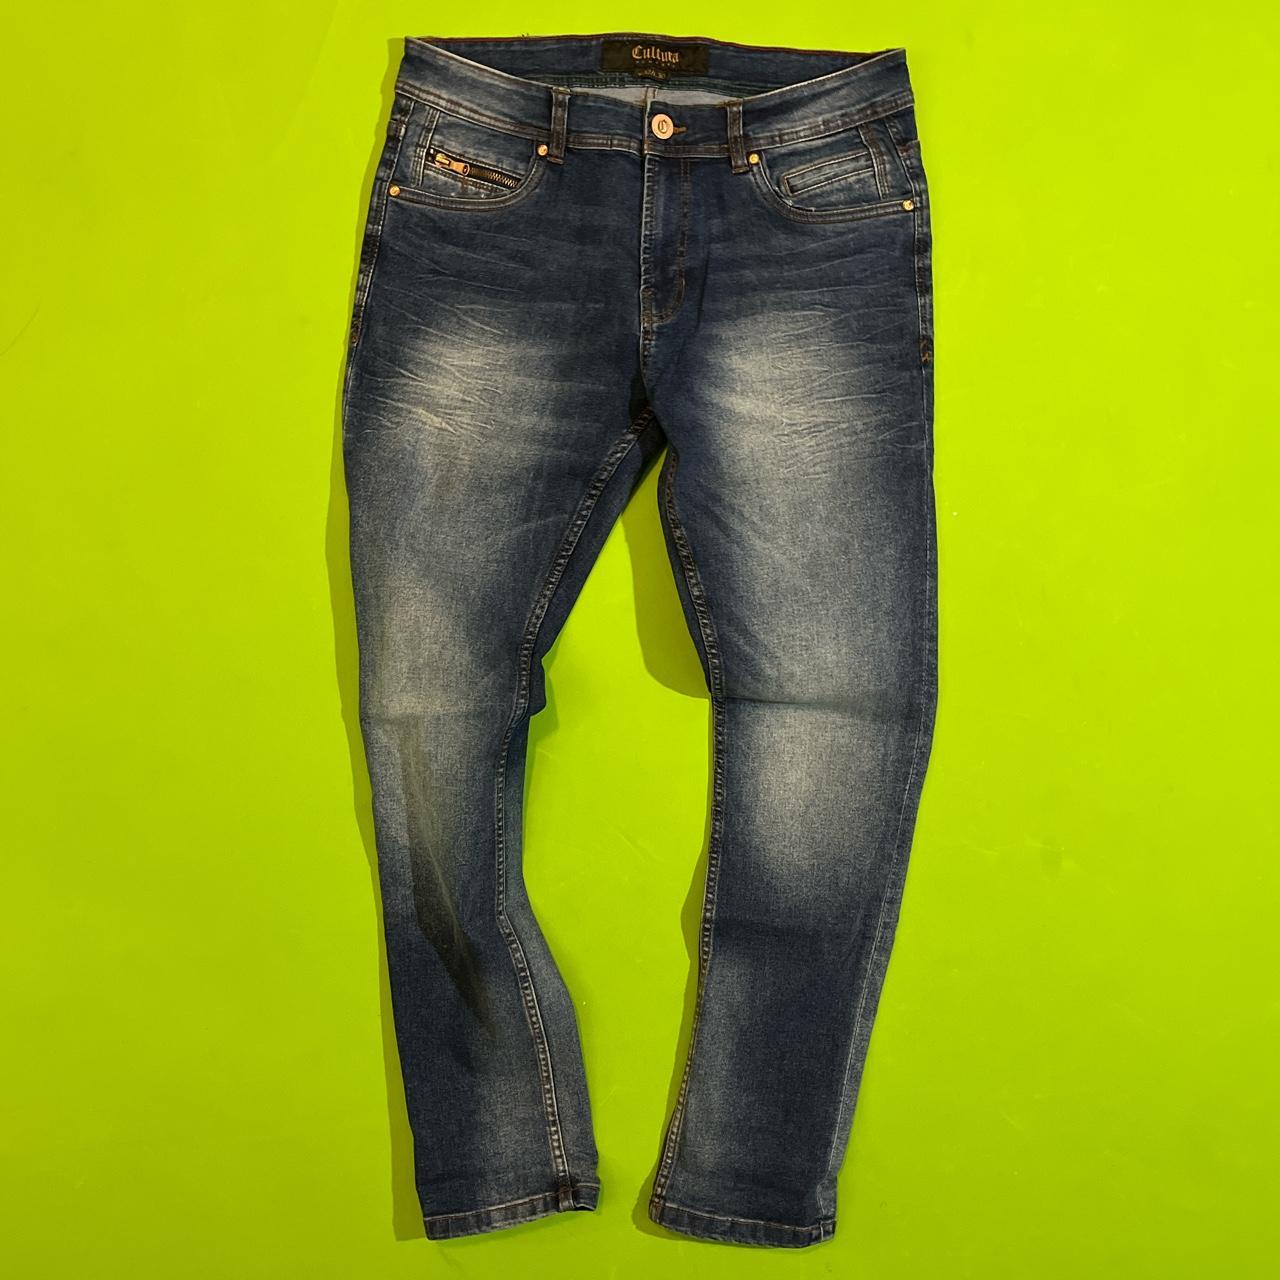 Cultura Men's Blue and Brown Jeans (3)